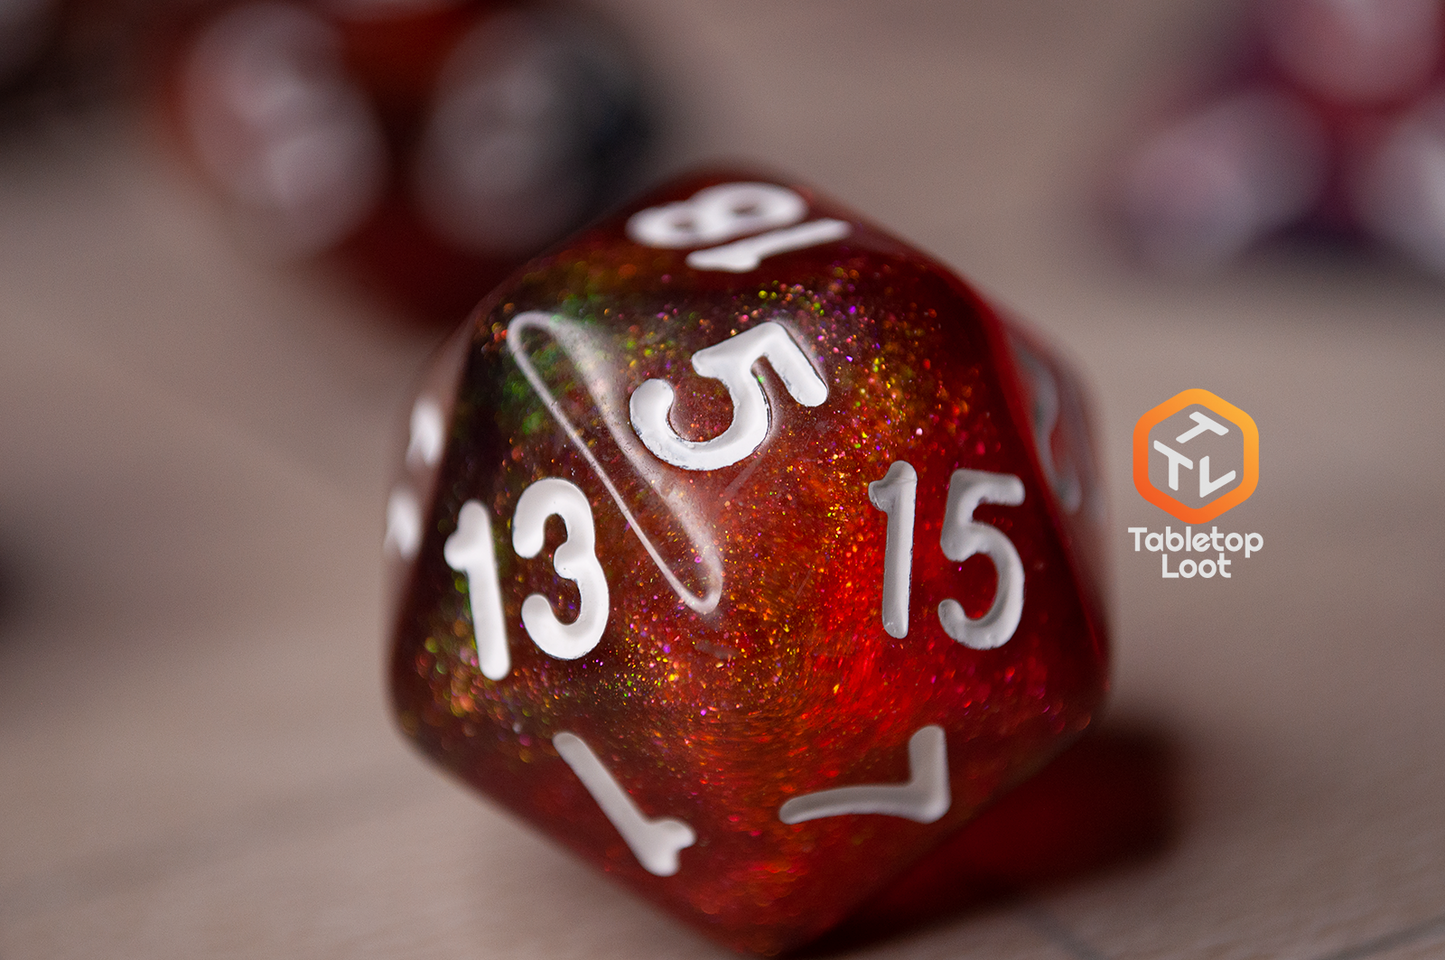 A close up of the D20 from the Interstellar 7 piece dice set from Tabletop Loot with swirling shades of shimmery red and blue resin and white numbering.